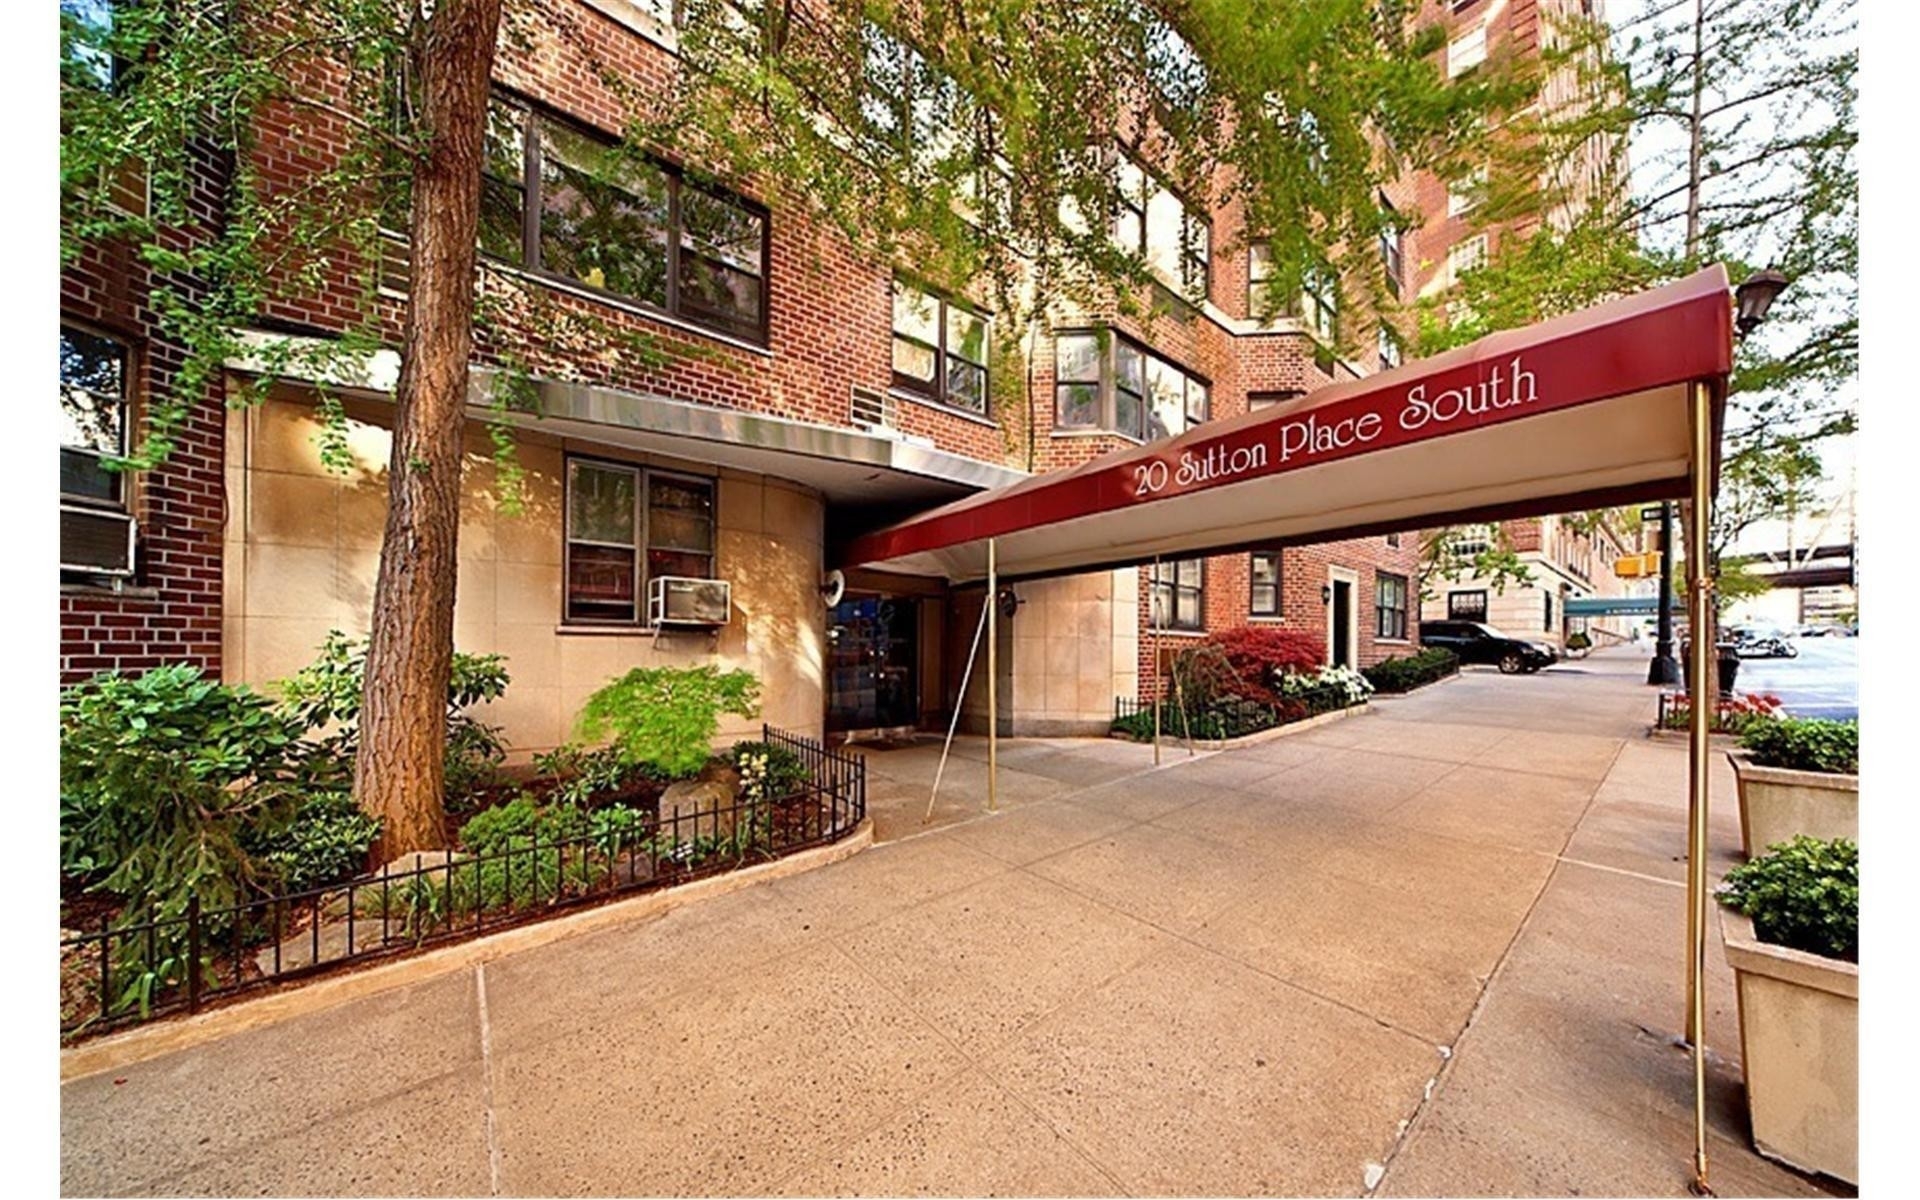 12. Co-op Properties for Sale at 20 SUTTON PL S, 8C Sutton Place, New York, New York 10022